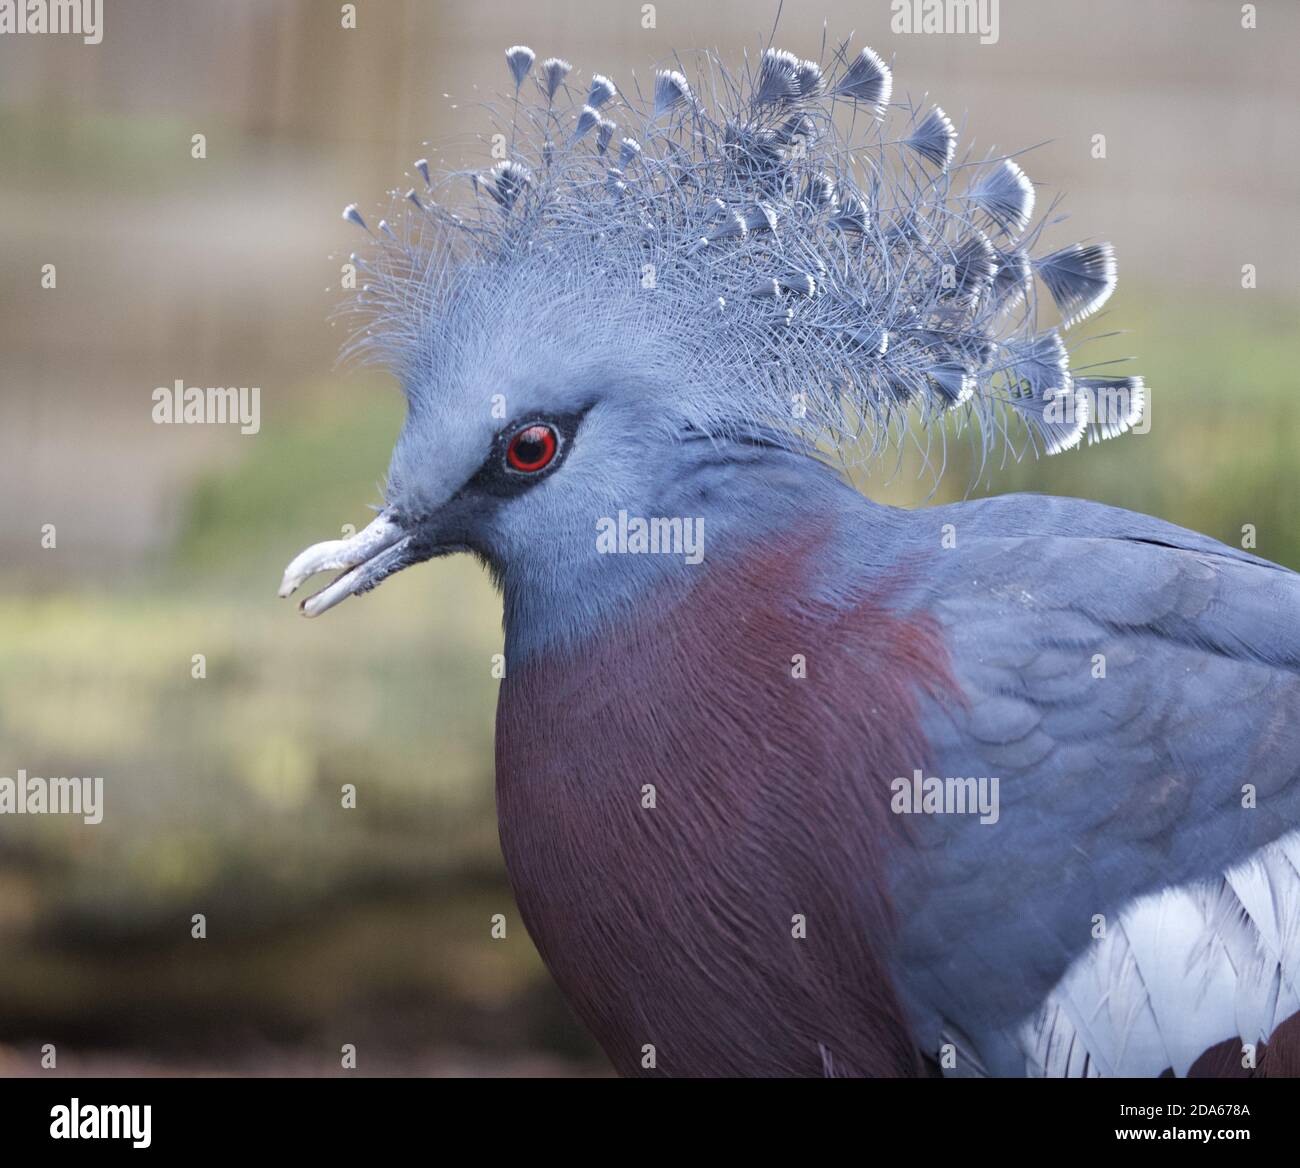 Closeup of a Victoria crowned pigeon, a bird with elegant blue lace-like crests Stock Photo